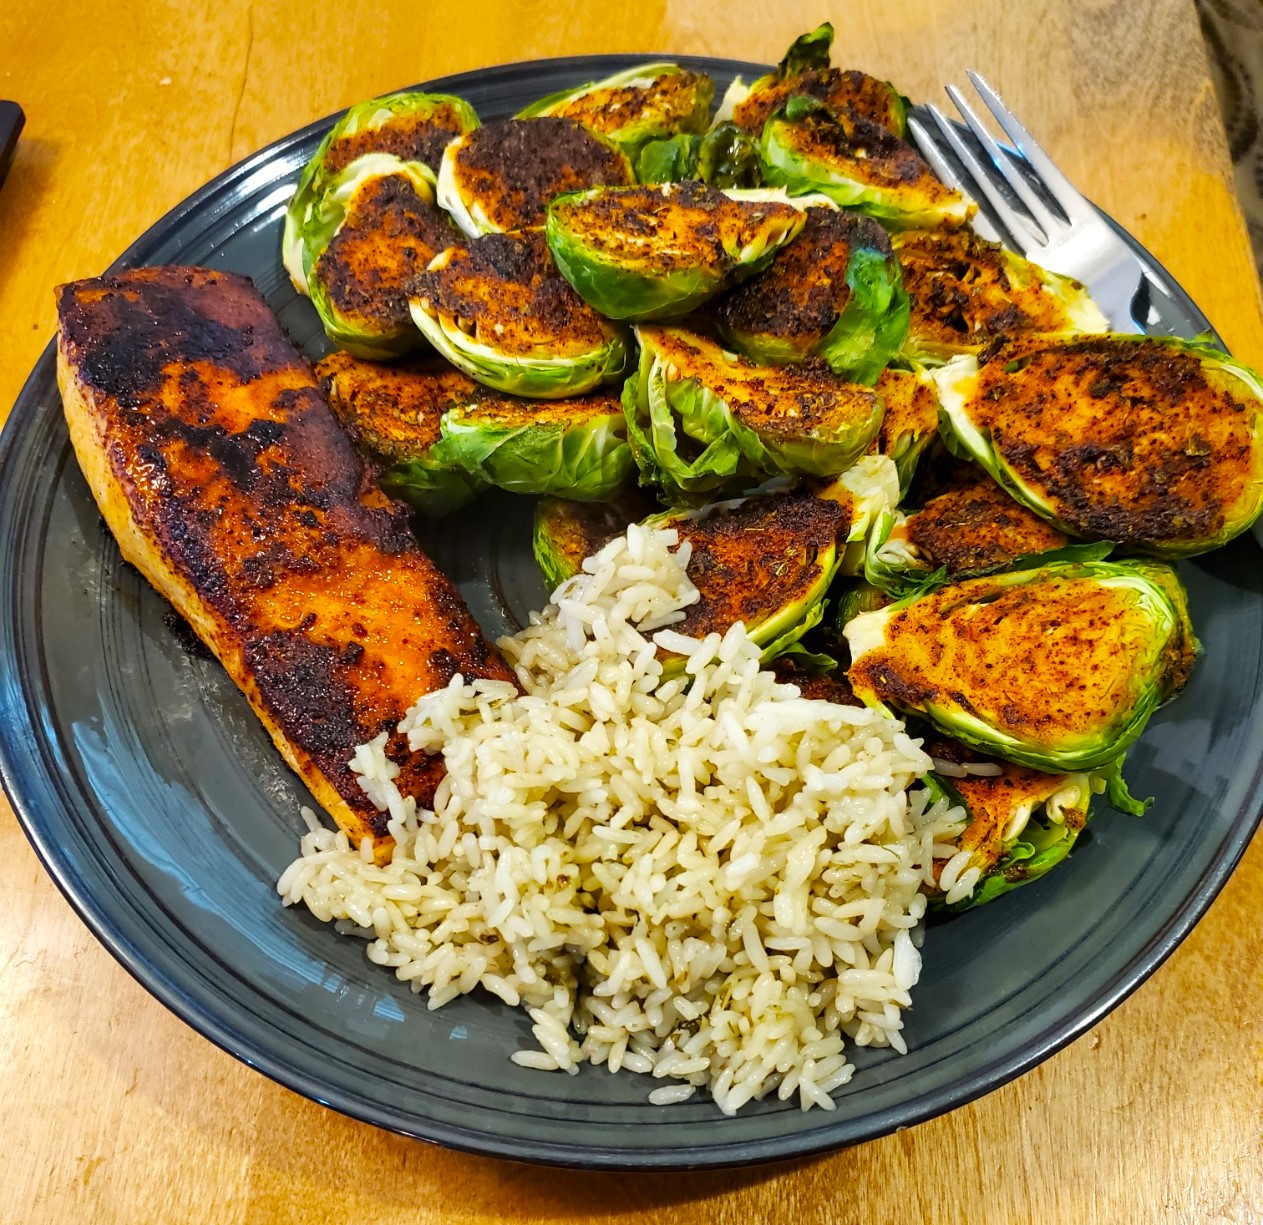 salmon and brussels sprouts.jpg